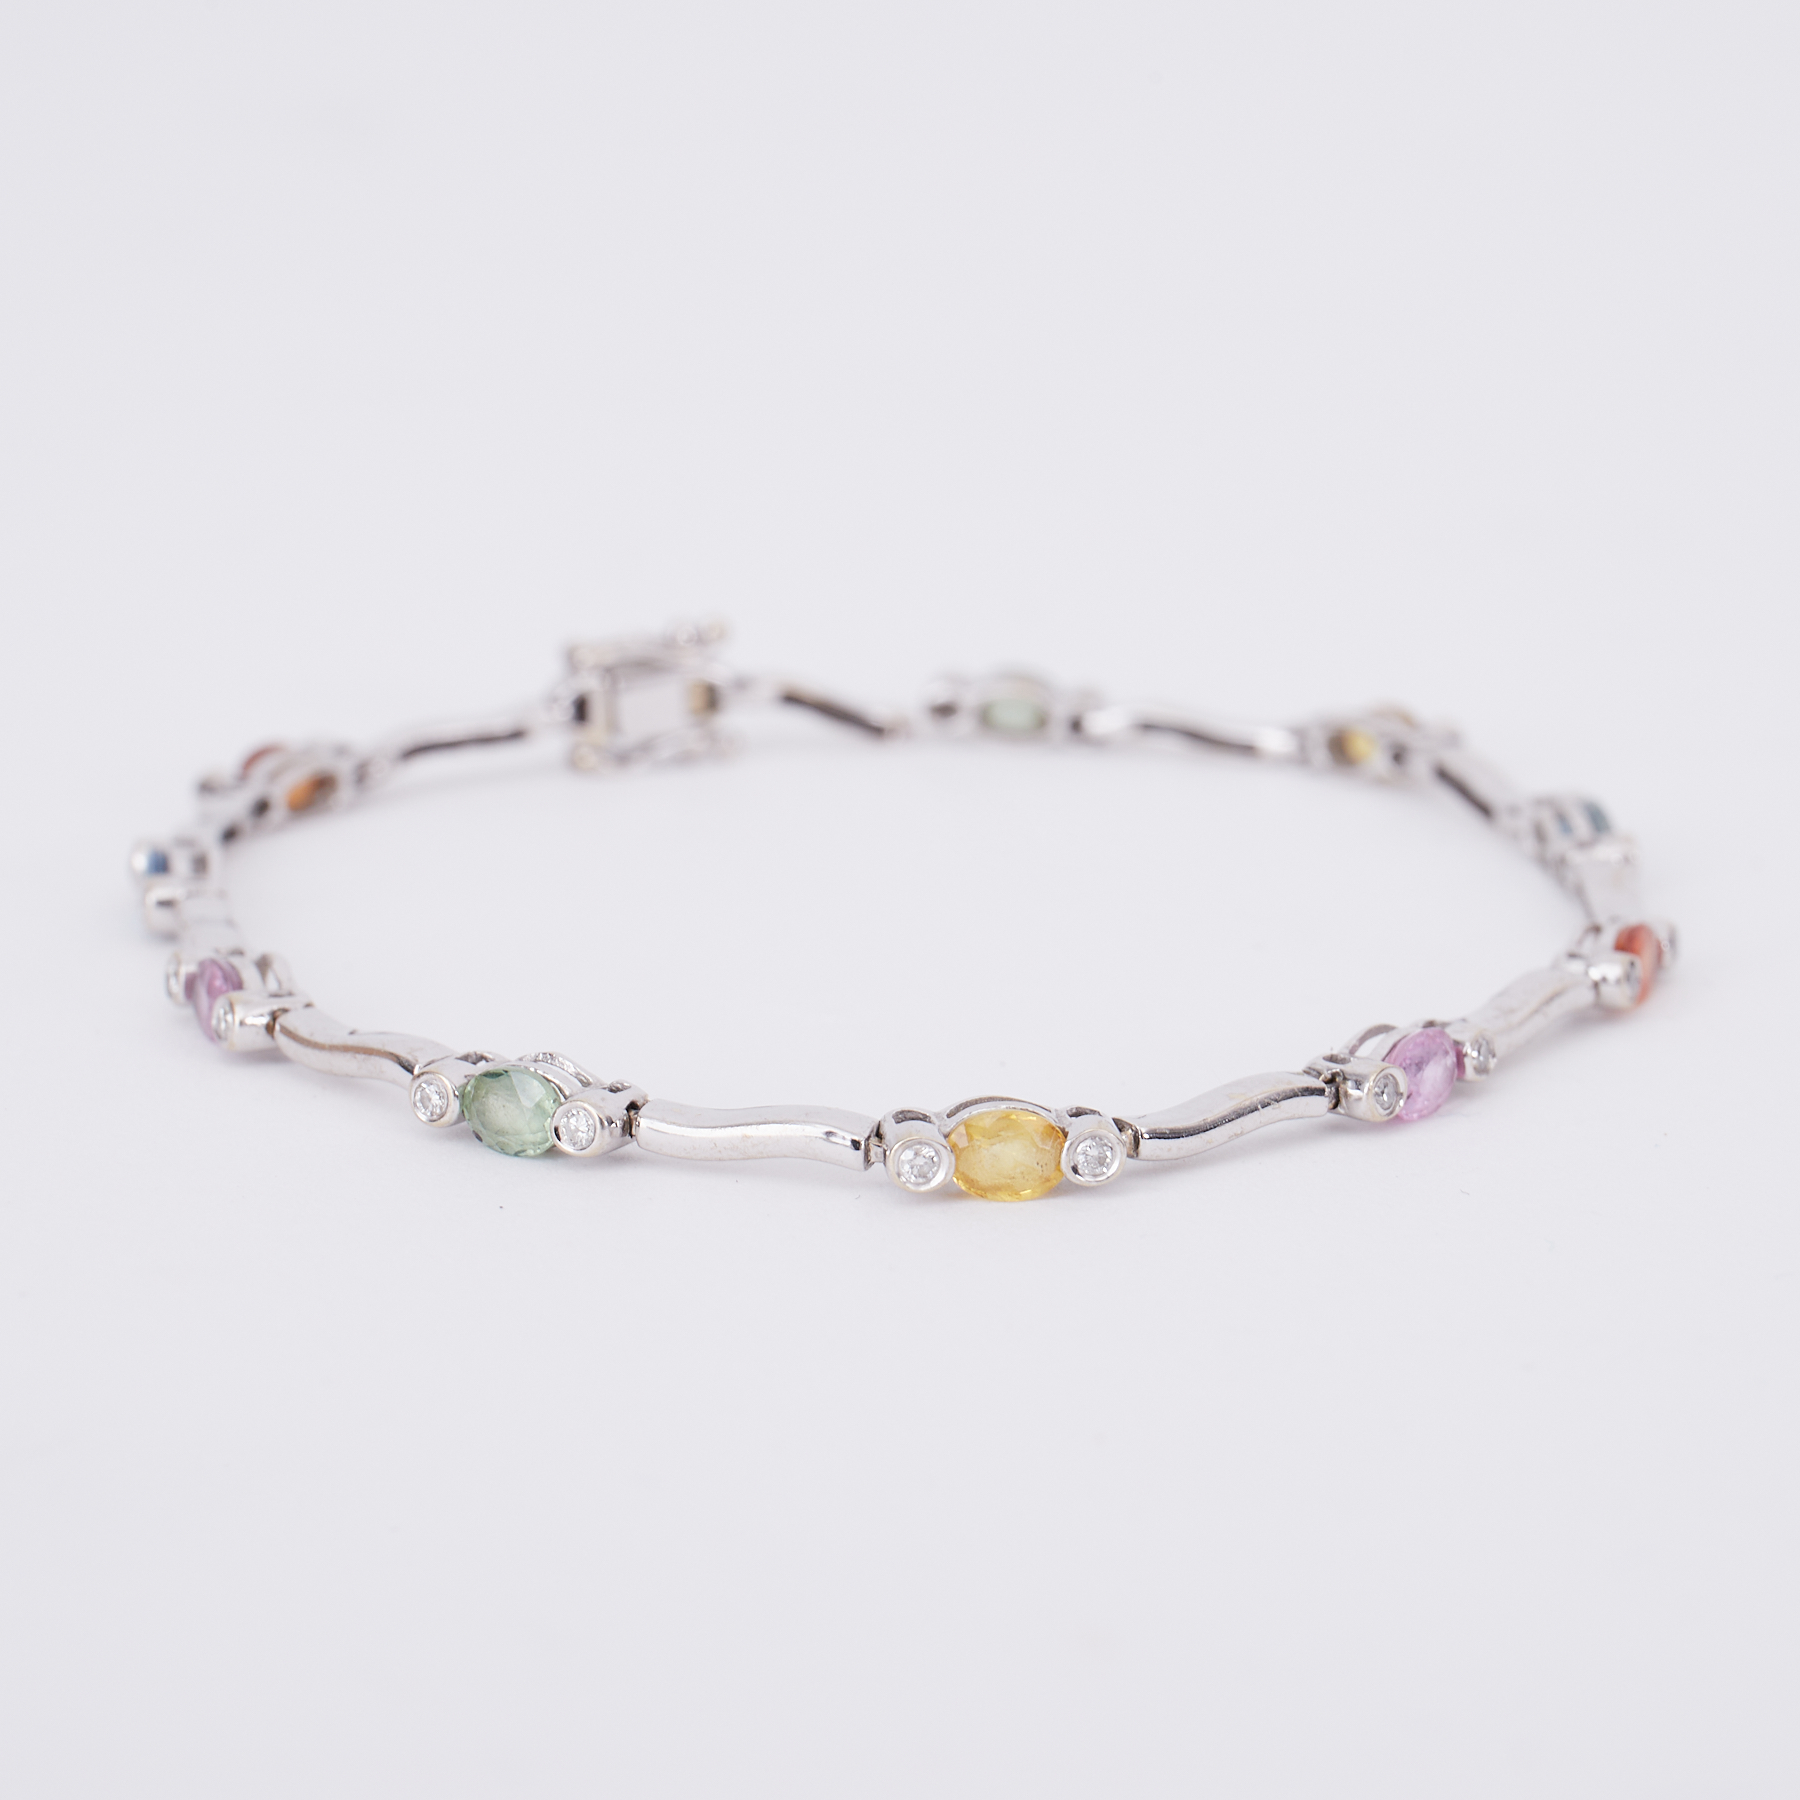 A white gold bracelet set with oval cut multi-coloured sapphires set in between small round